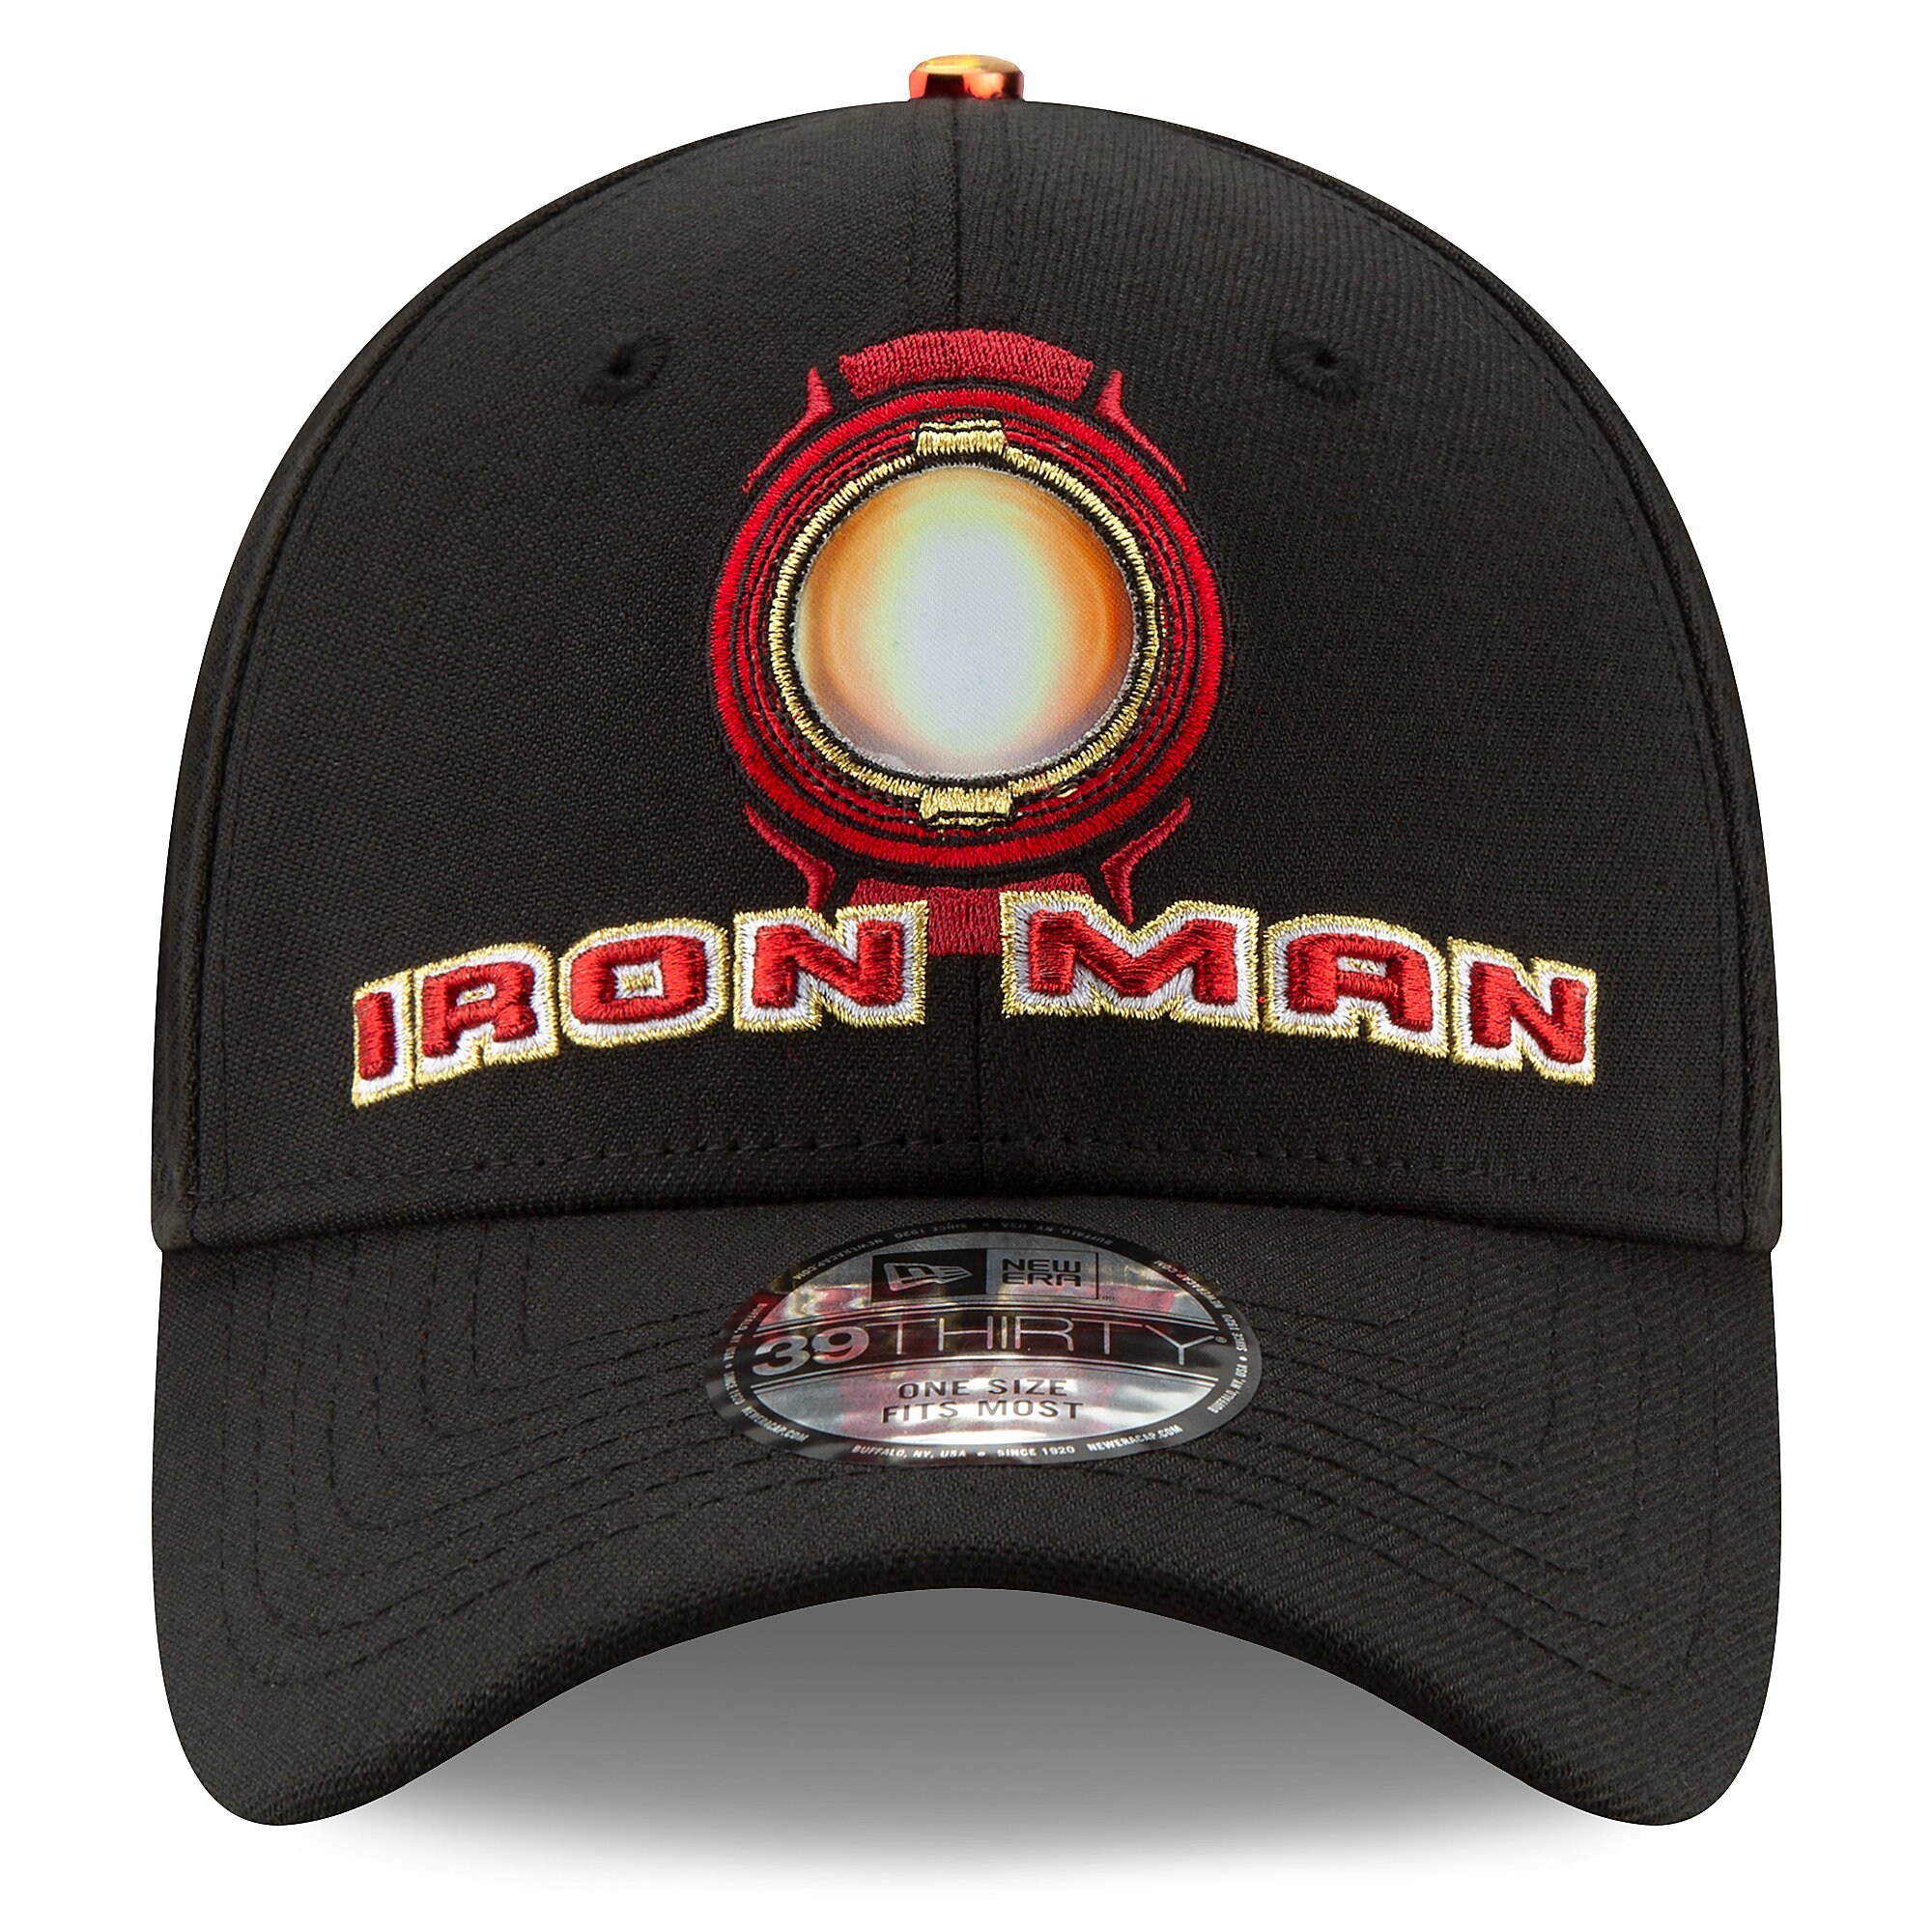 Limited Edition Collector Boxed Iron Man Cap by New Era